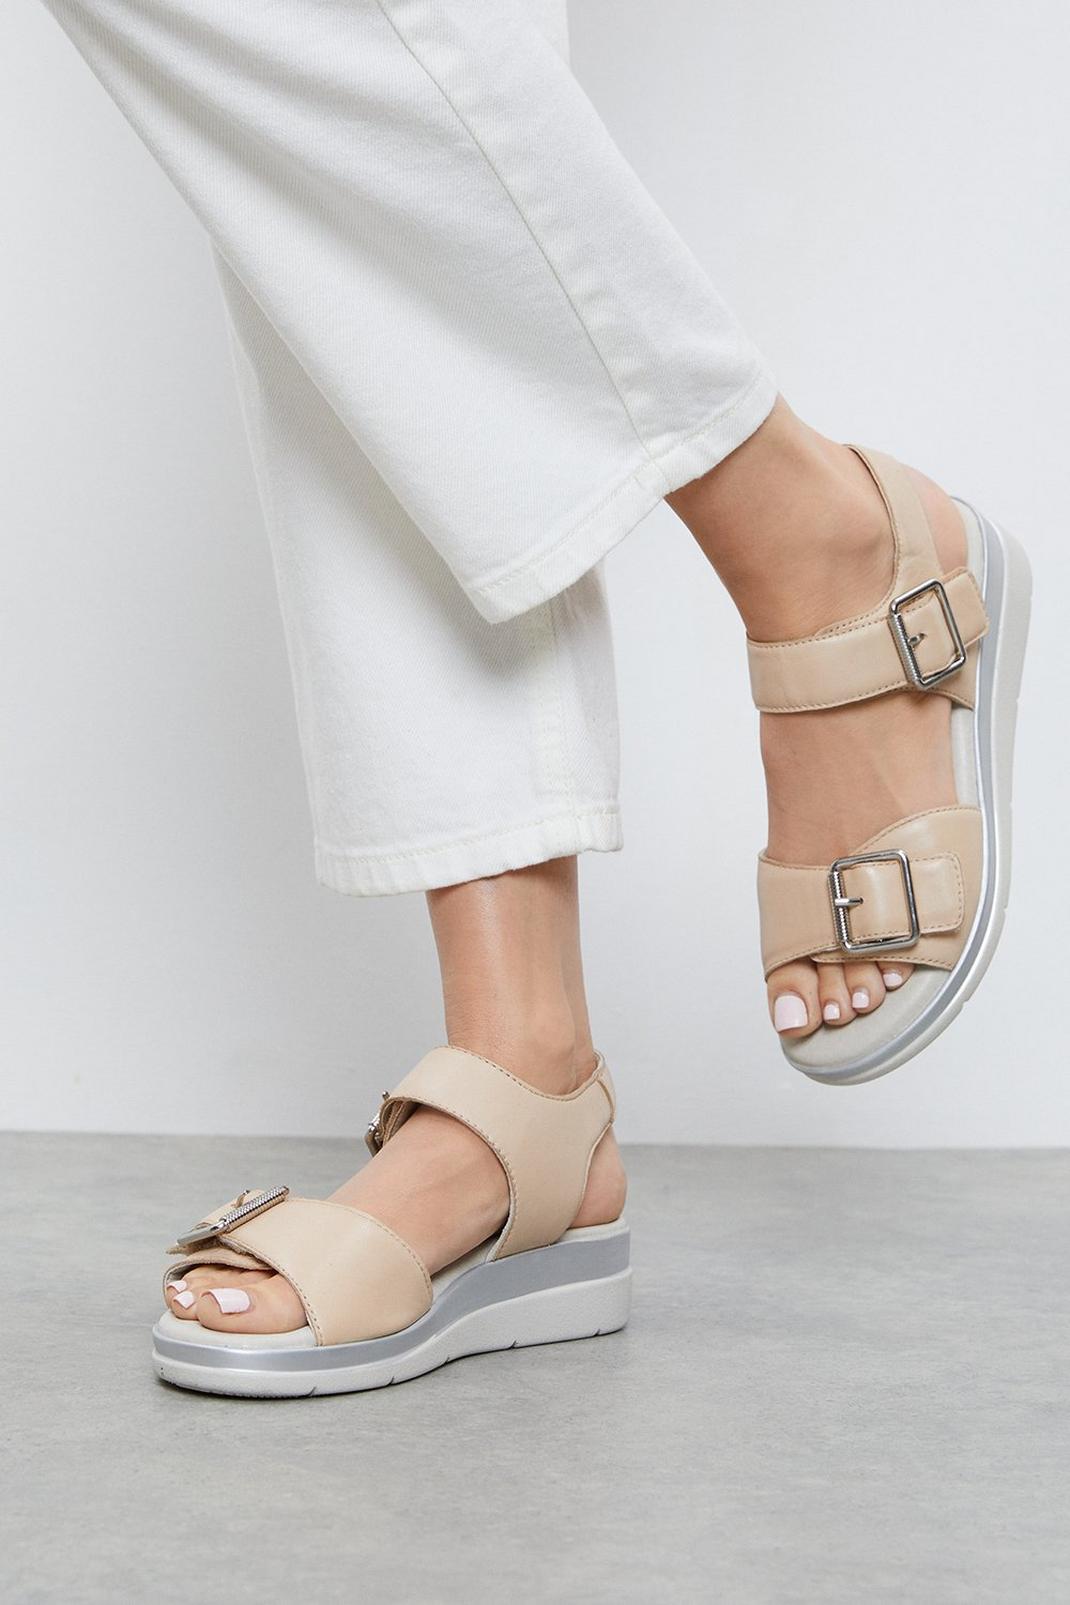 Ochre Good For The Sole: Leather Comfort Tullie Buckle Flat Sandal image number 1